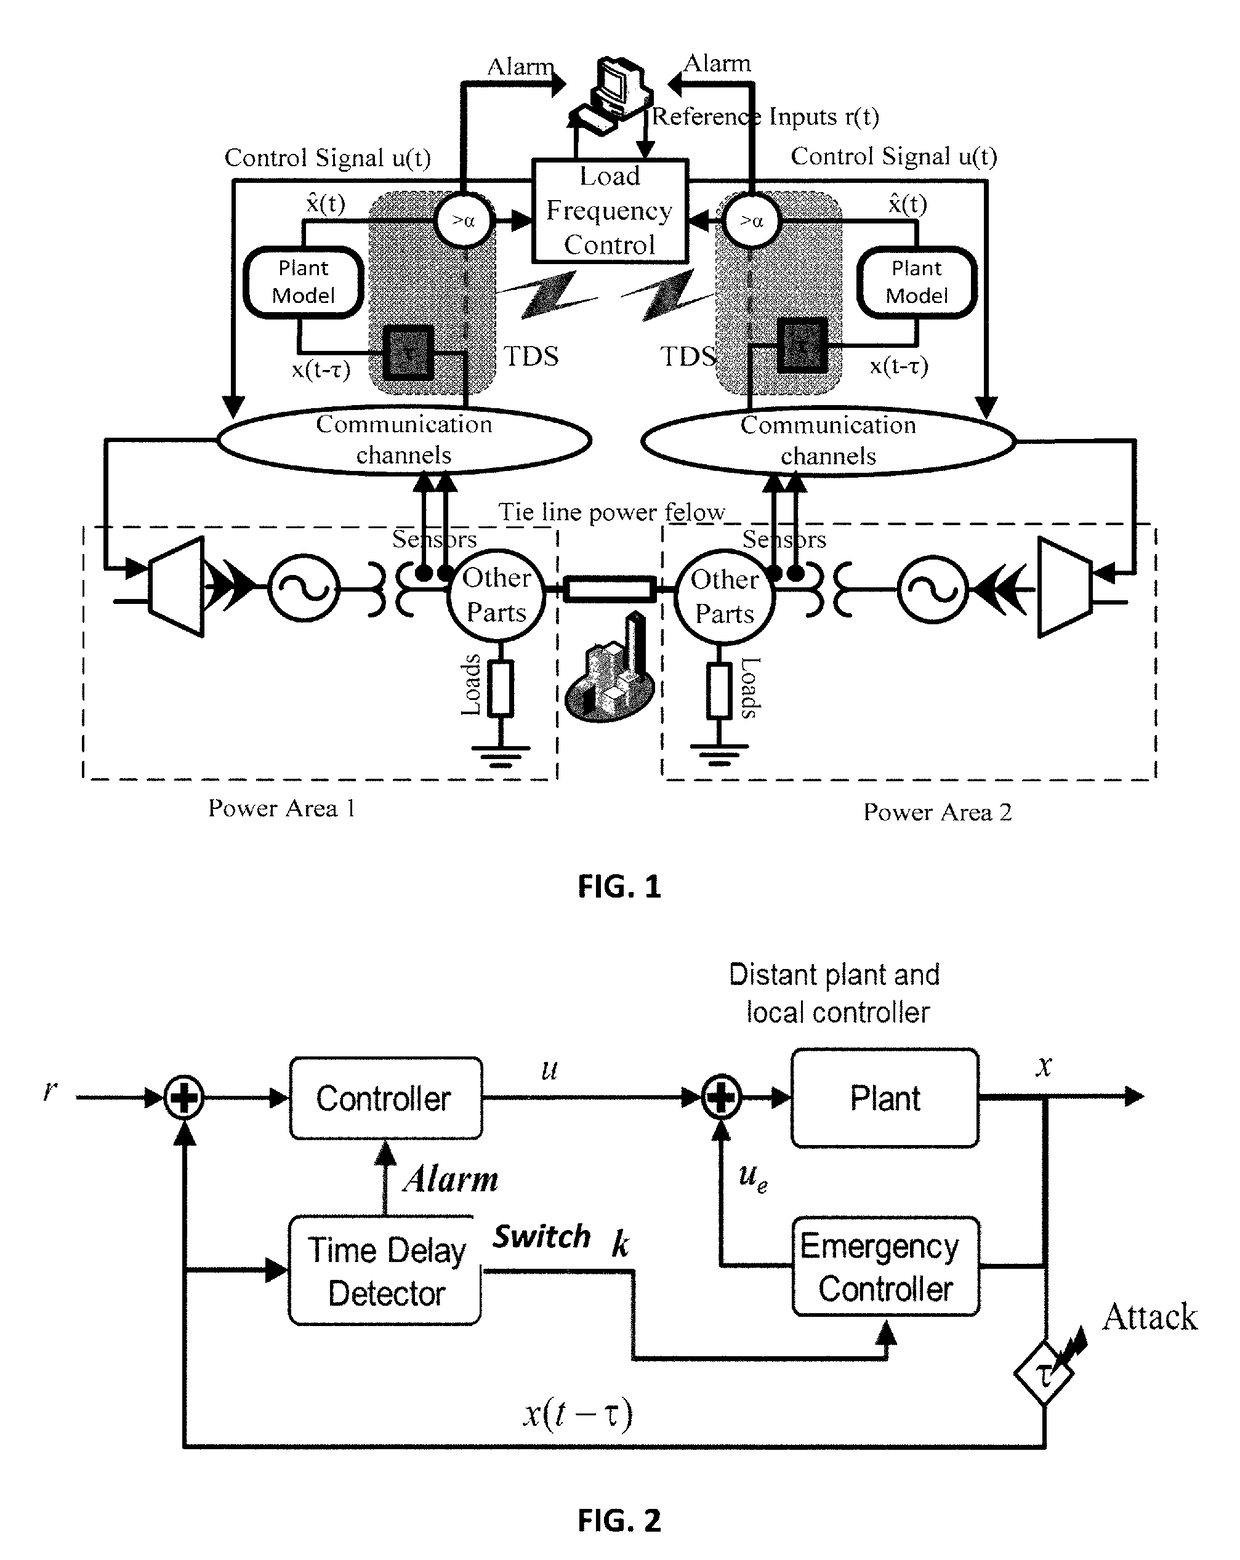 Detection of and responses to time delays in networked control systems